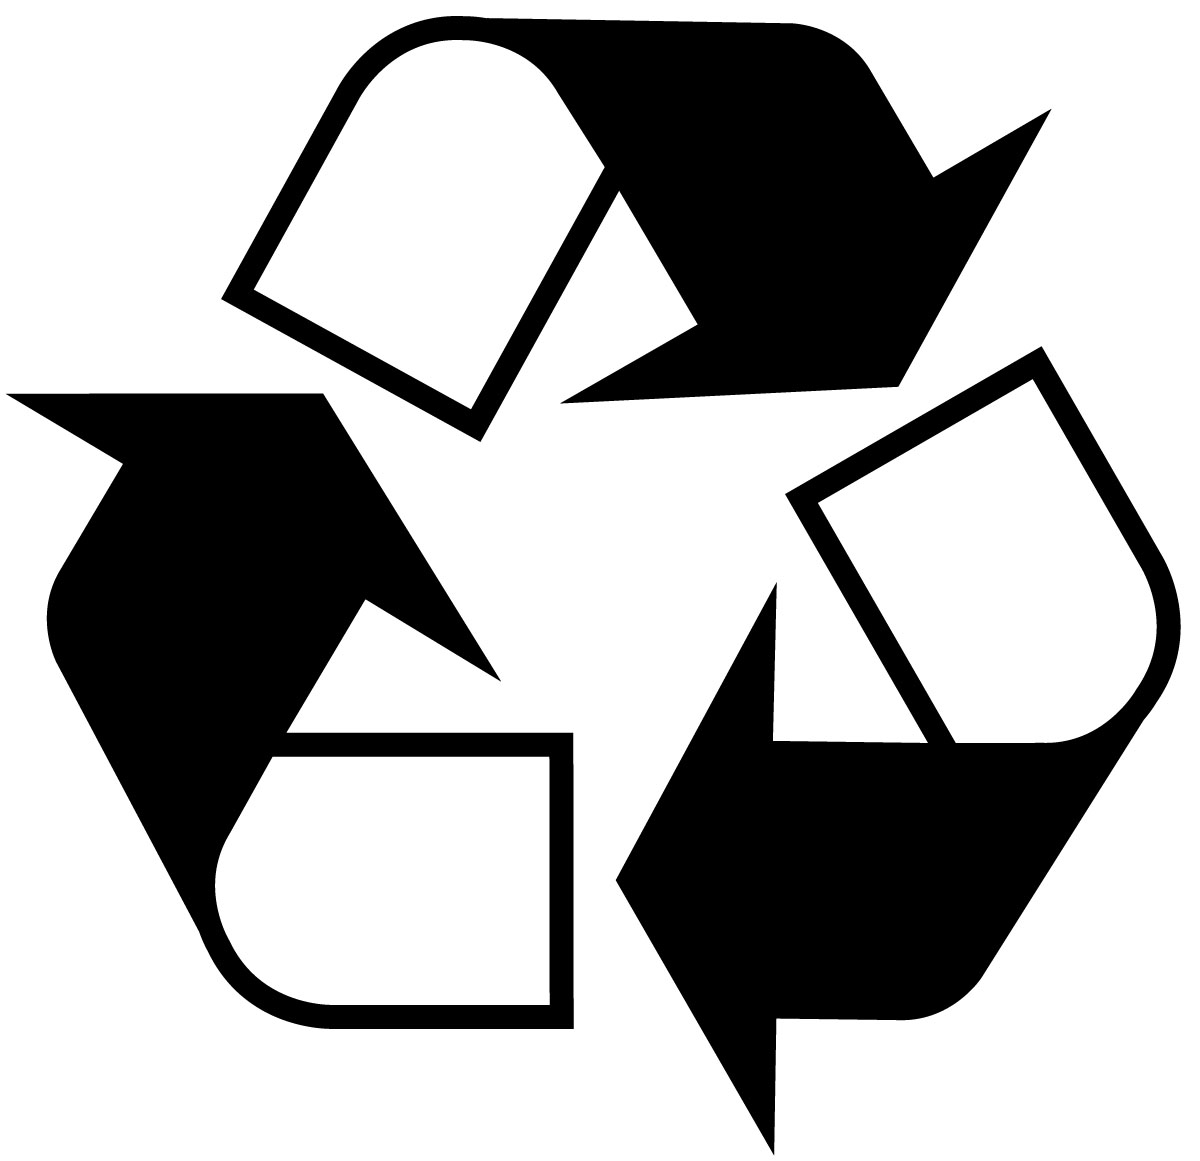 Teaching children to reduce re-use and recycle